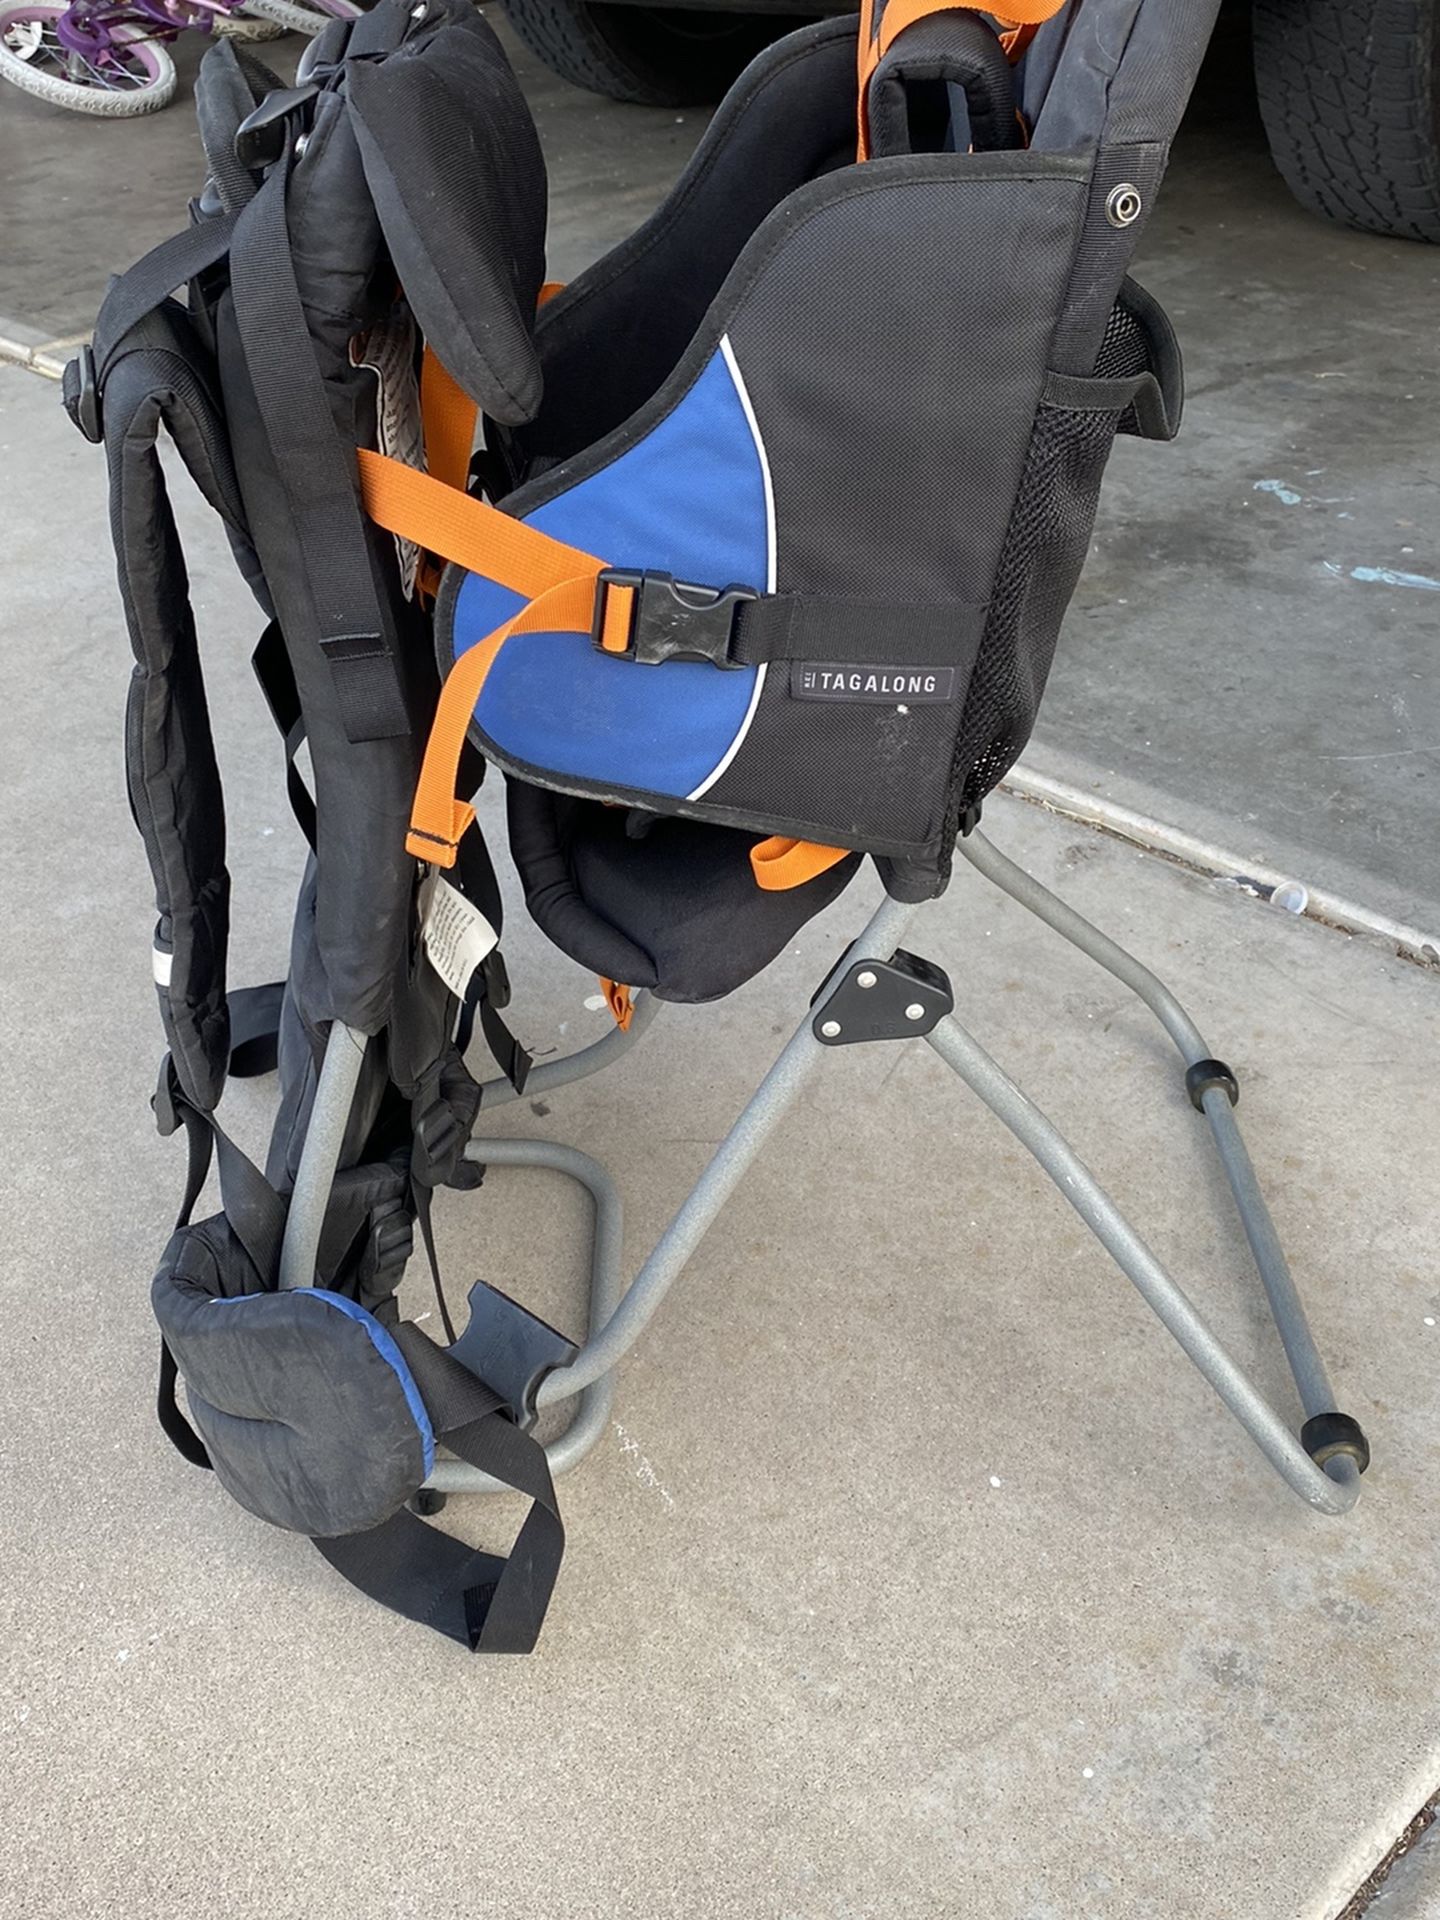 REI Child Carrier And Hiking Backpack